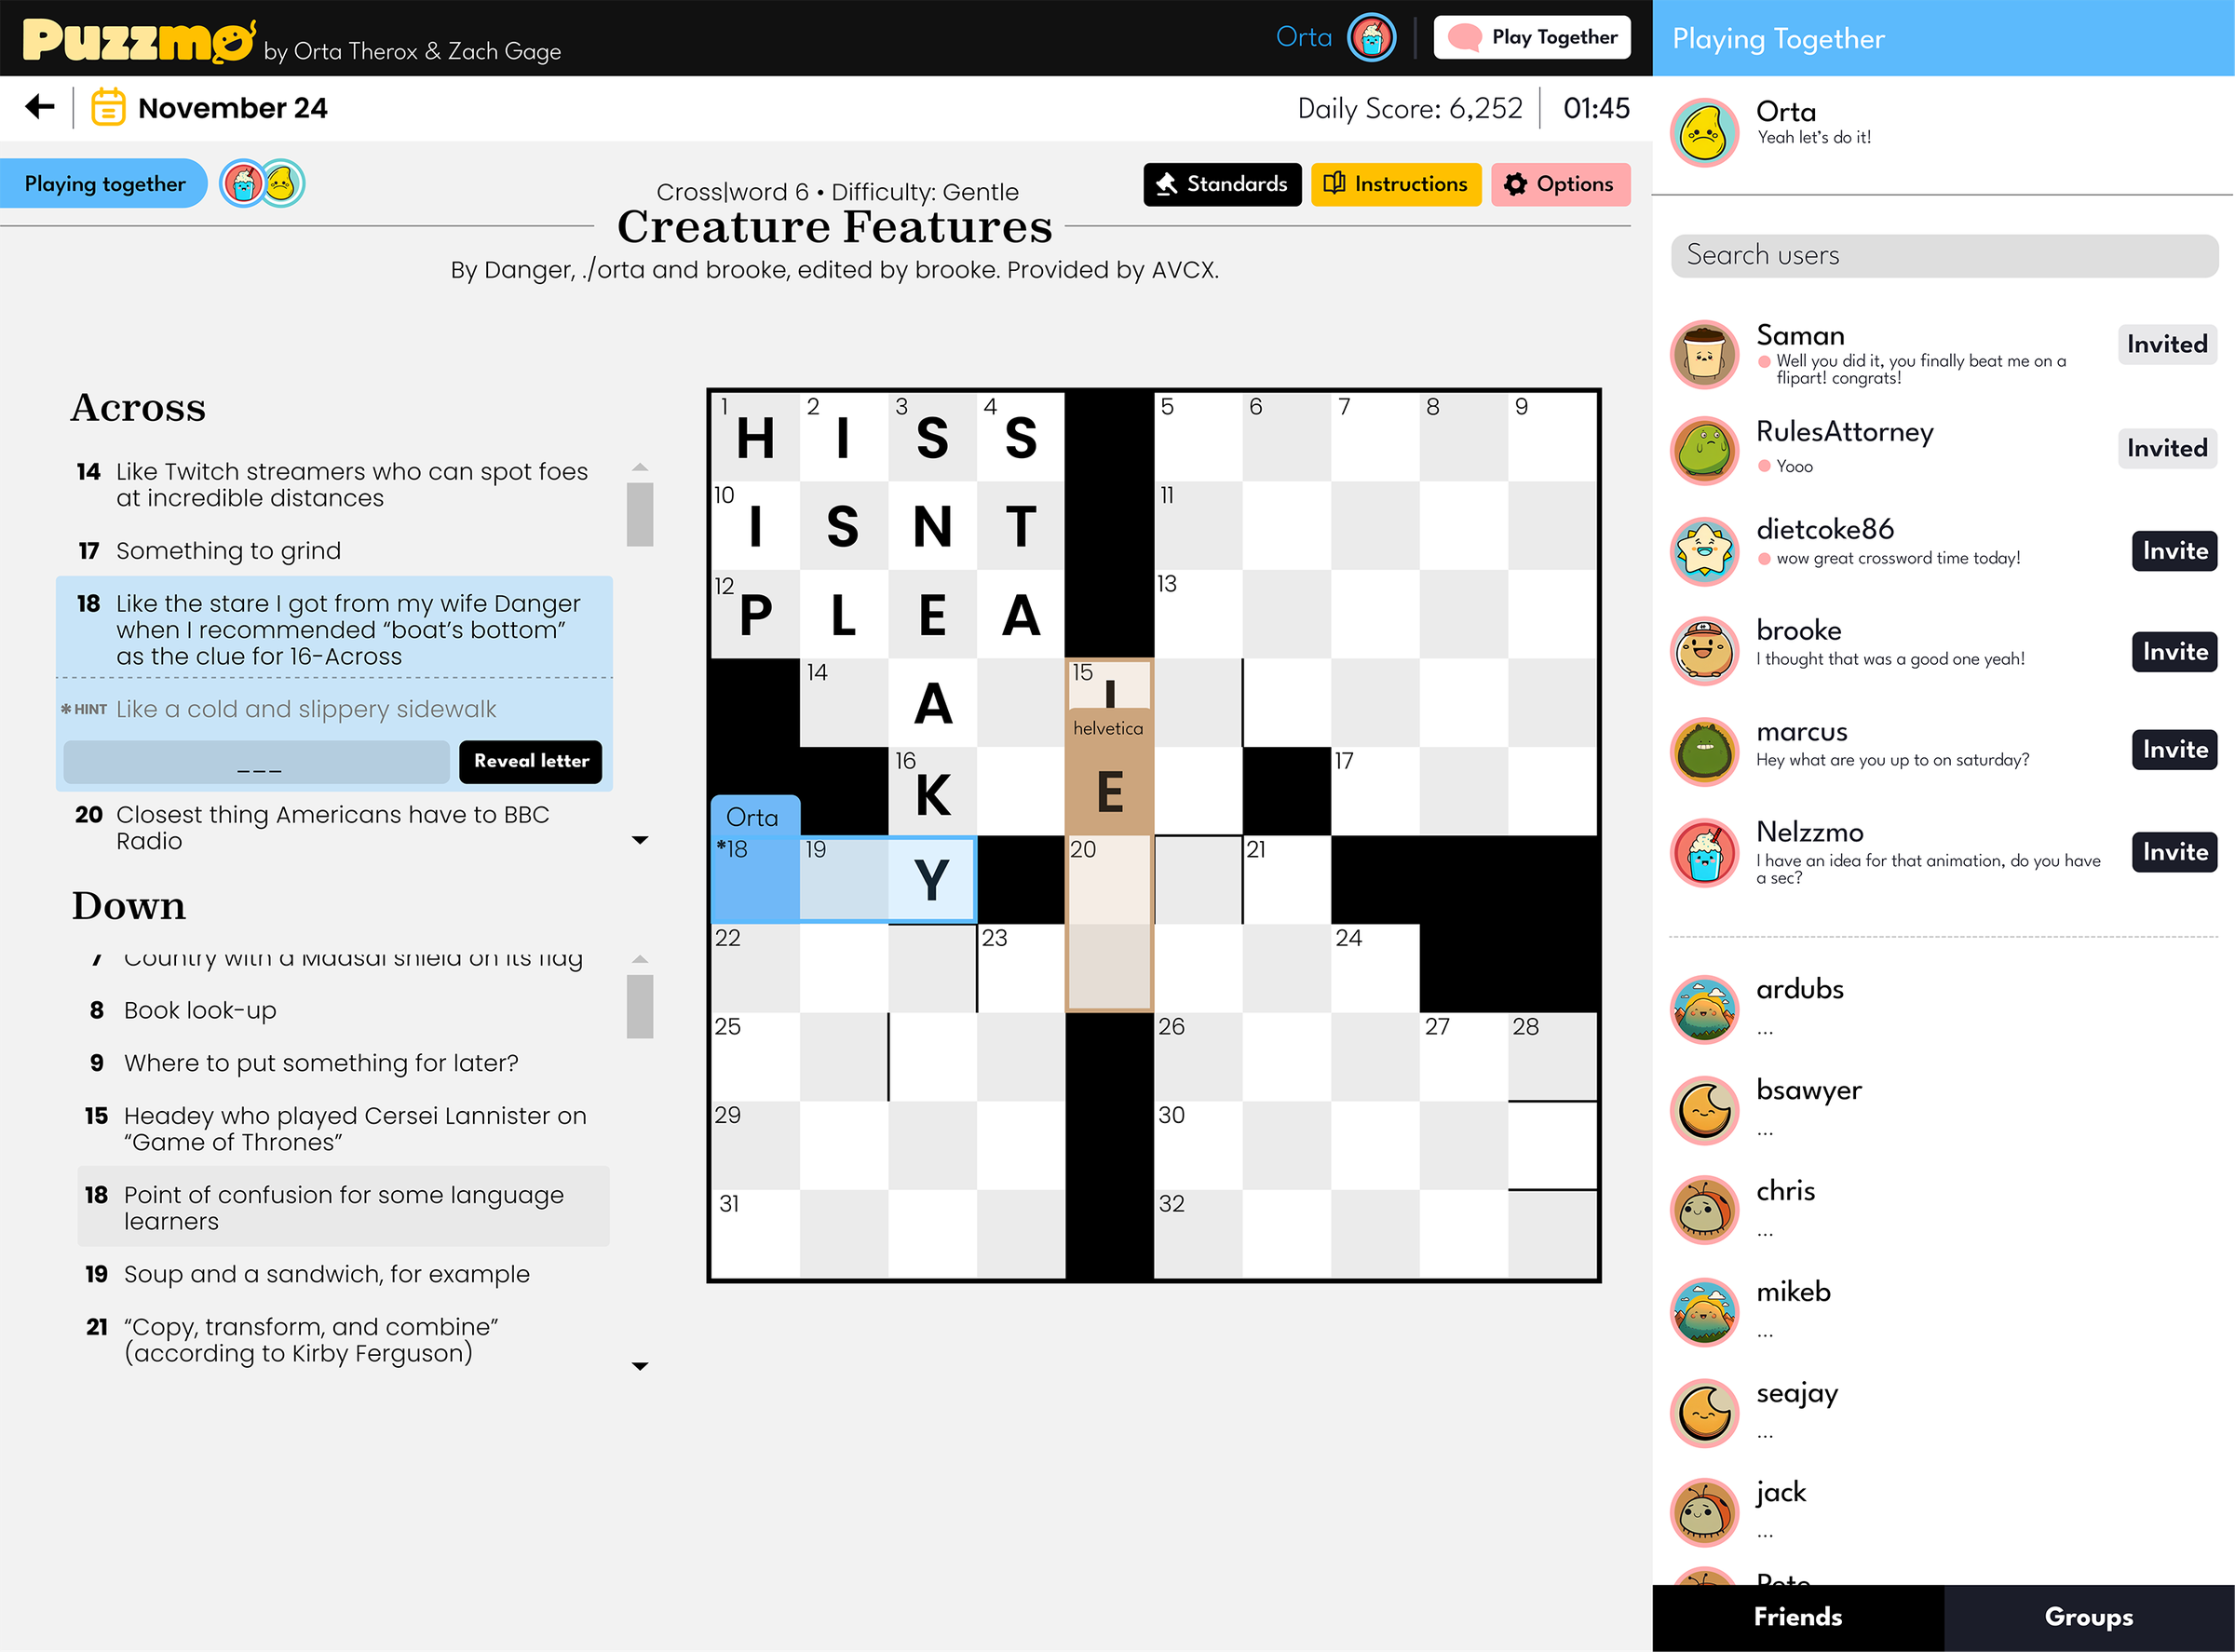 A screenshot of the Puzzmo crossword puzzle, played in multiplayer mode.